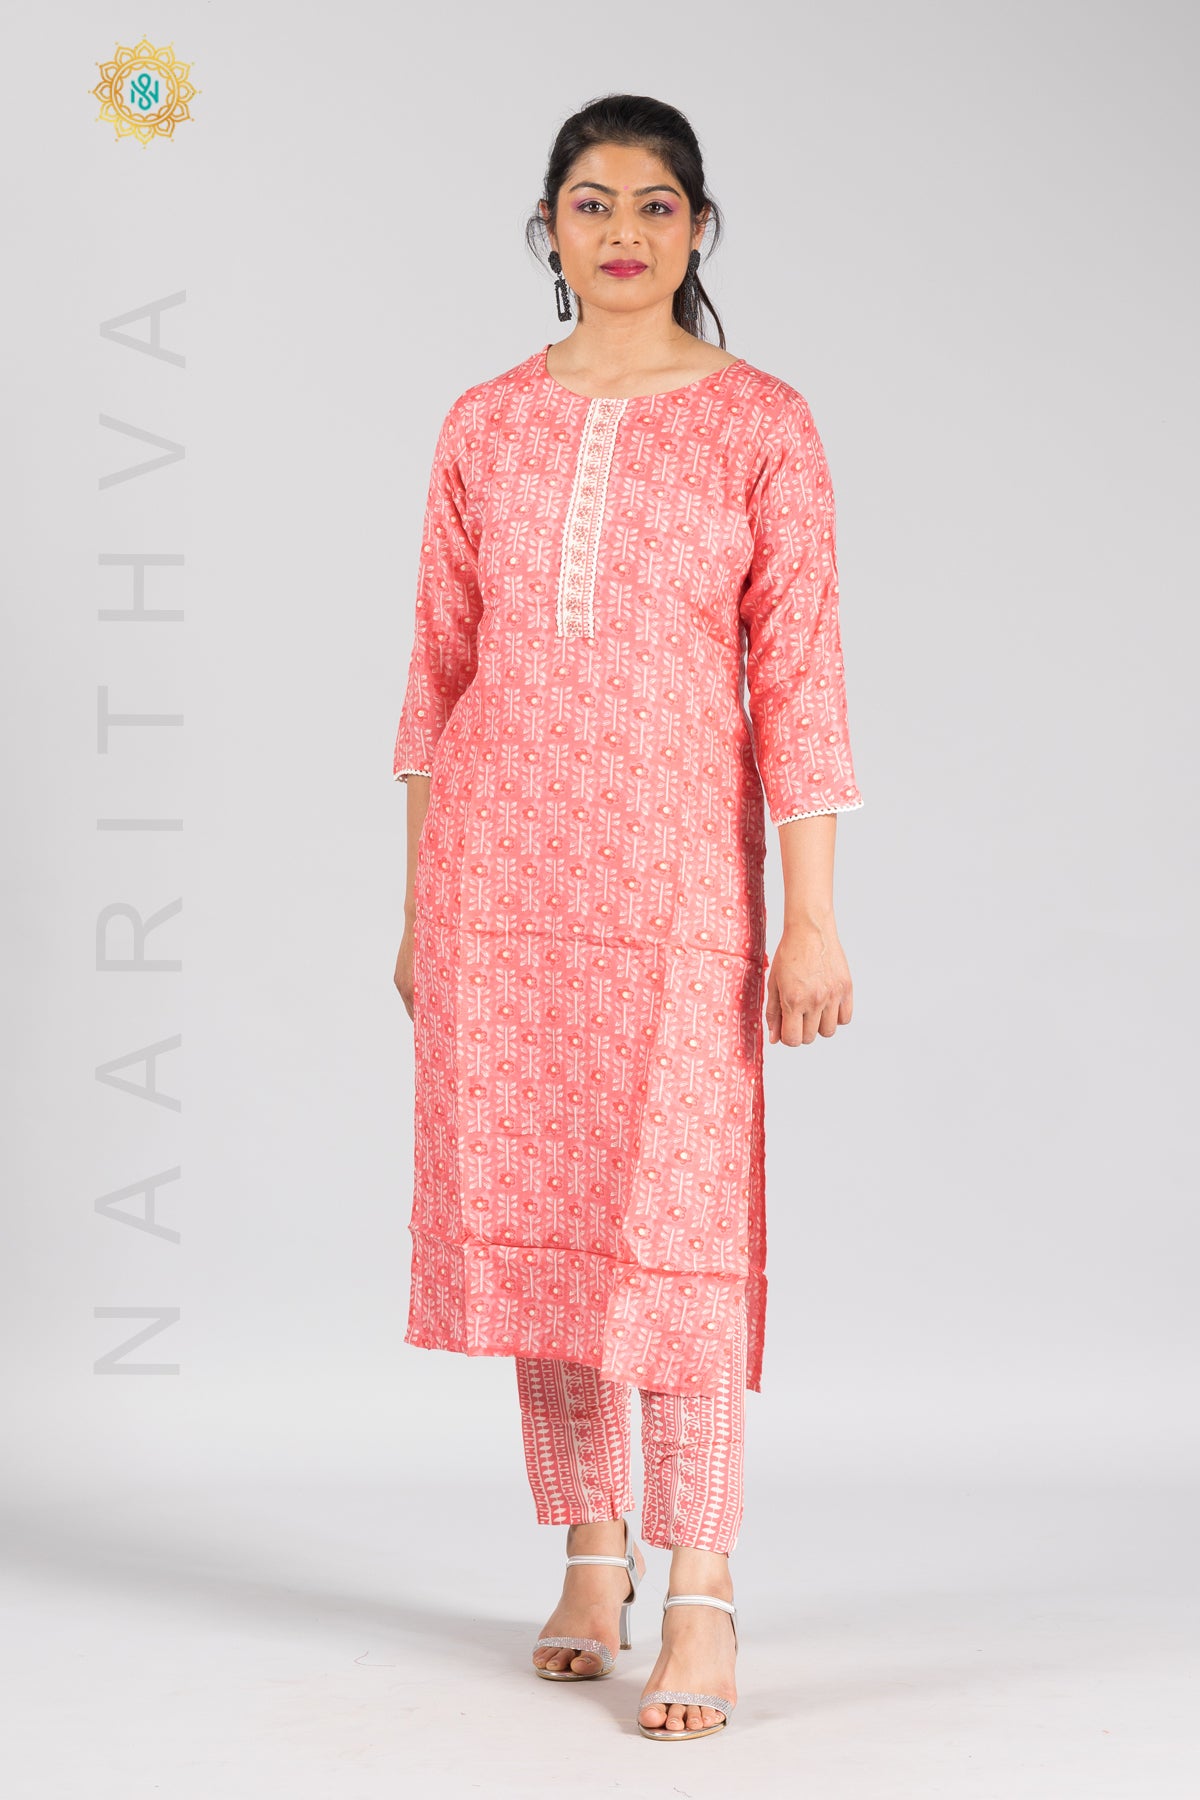 White chanderi readymade suit, patola-style printed 3/4th sleeve top,  patola-style print dupatta & straight-cut pants